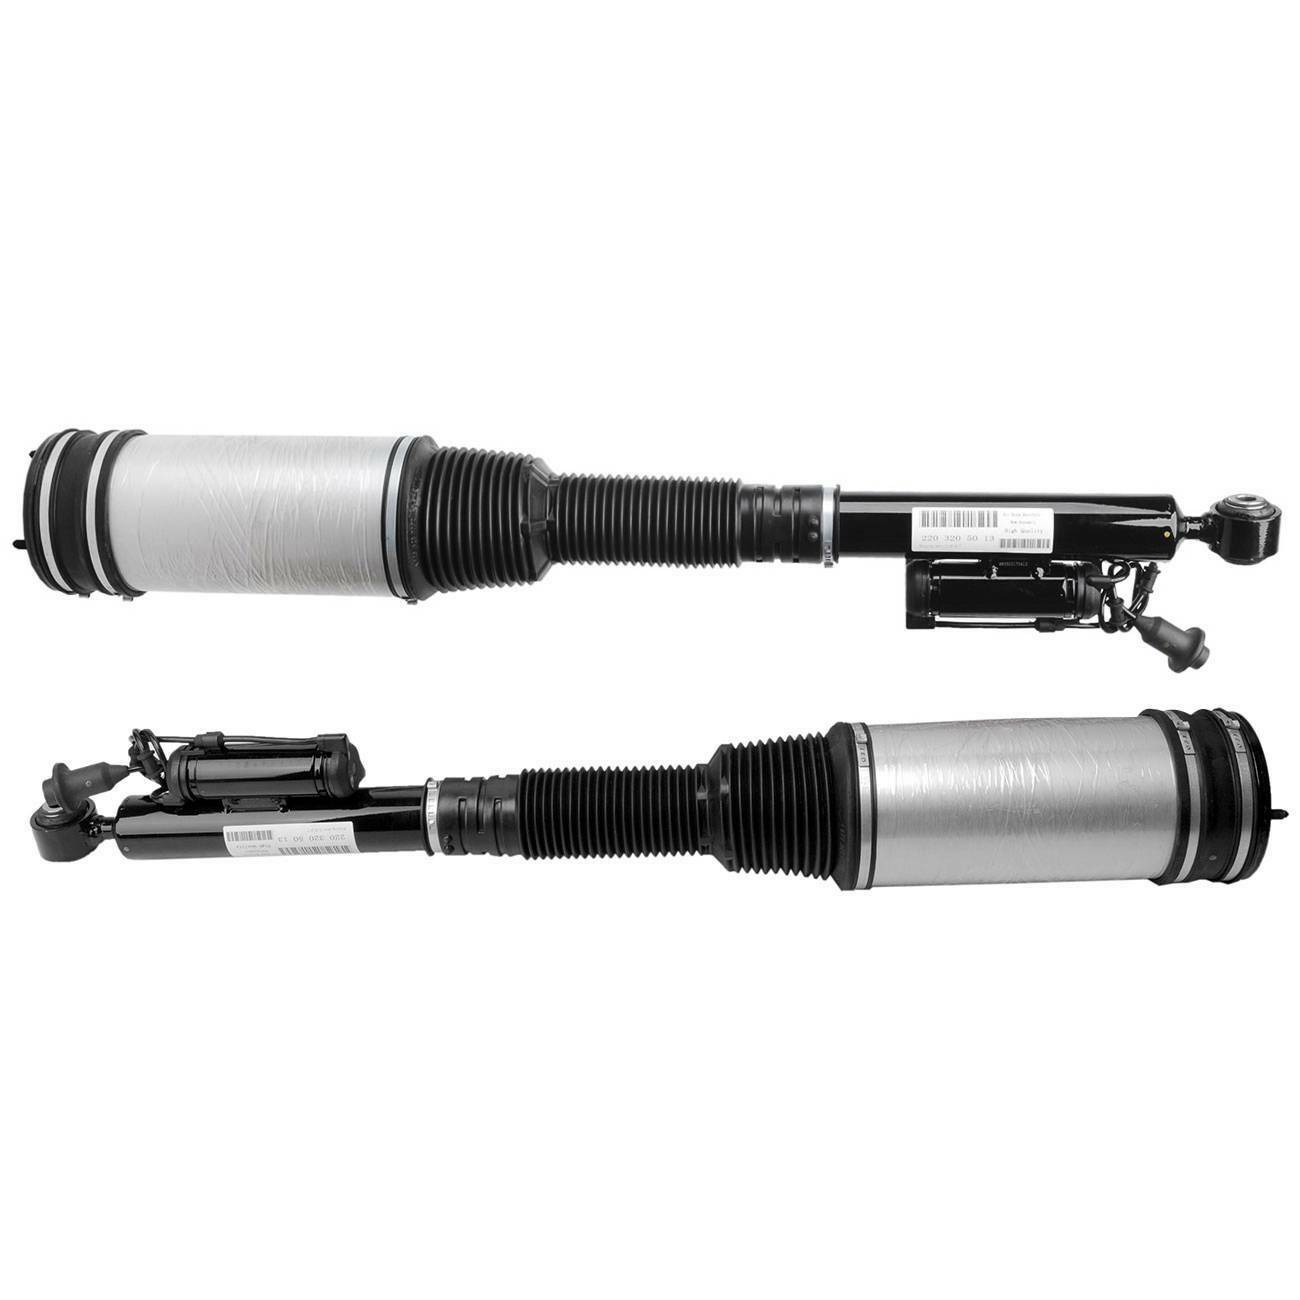 2Pcs Rear Air Suspension Shock Strut for Mercedes W220 S430 S500 S600 S55 65 AMG German Made